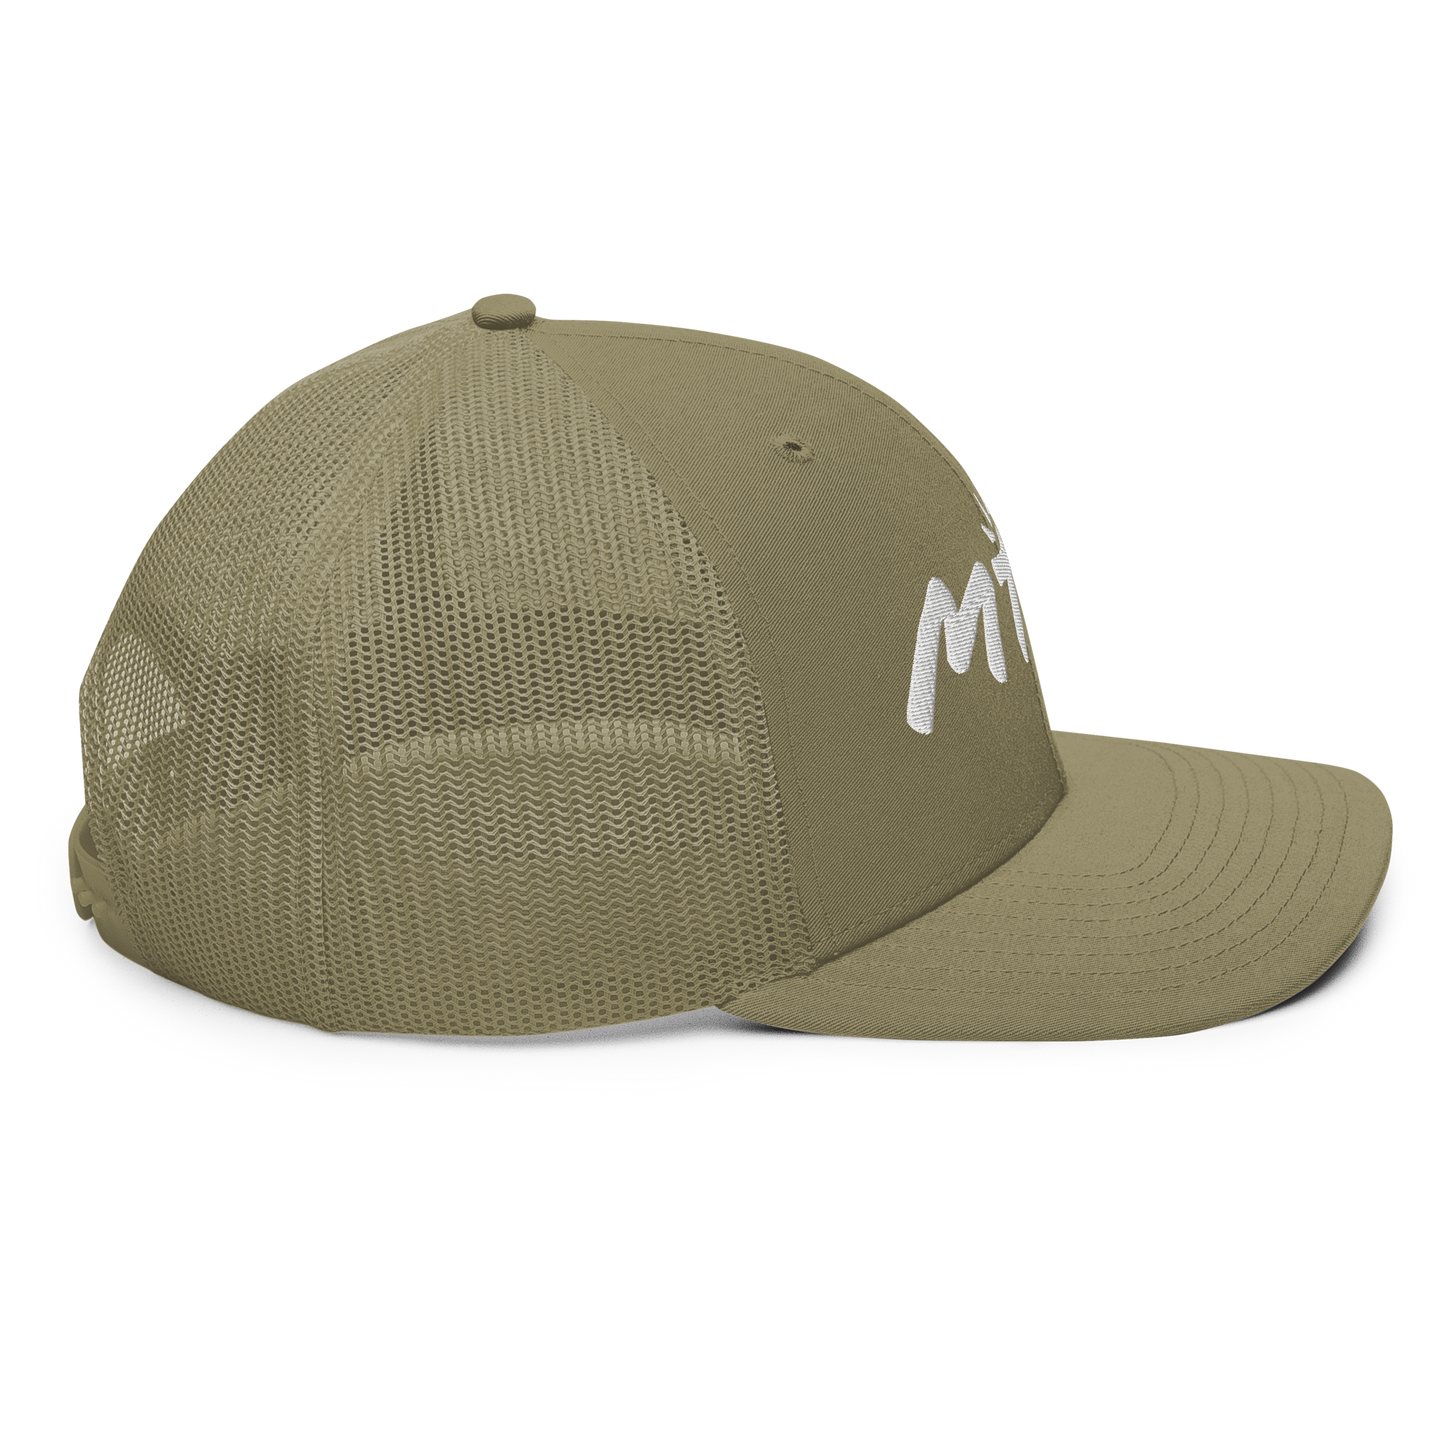 MTJN TRUCKER - The General Booty Official Shop by More Than Just A Name | MTJN